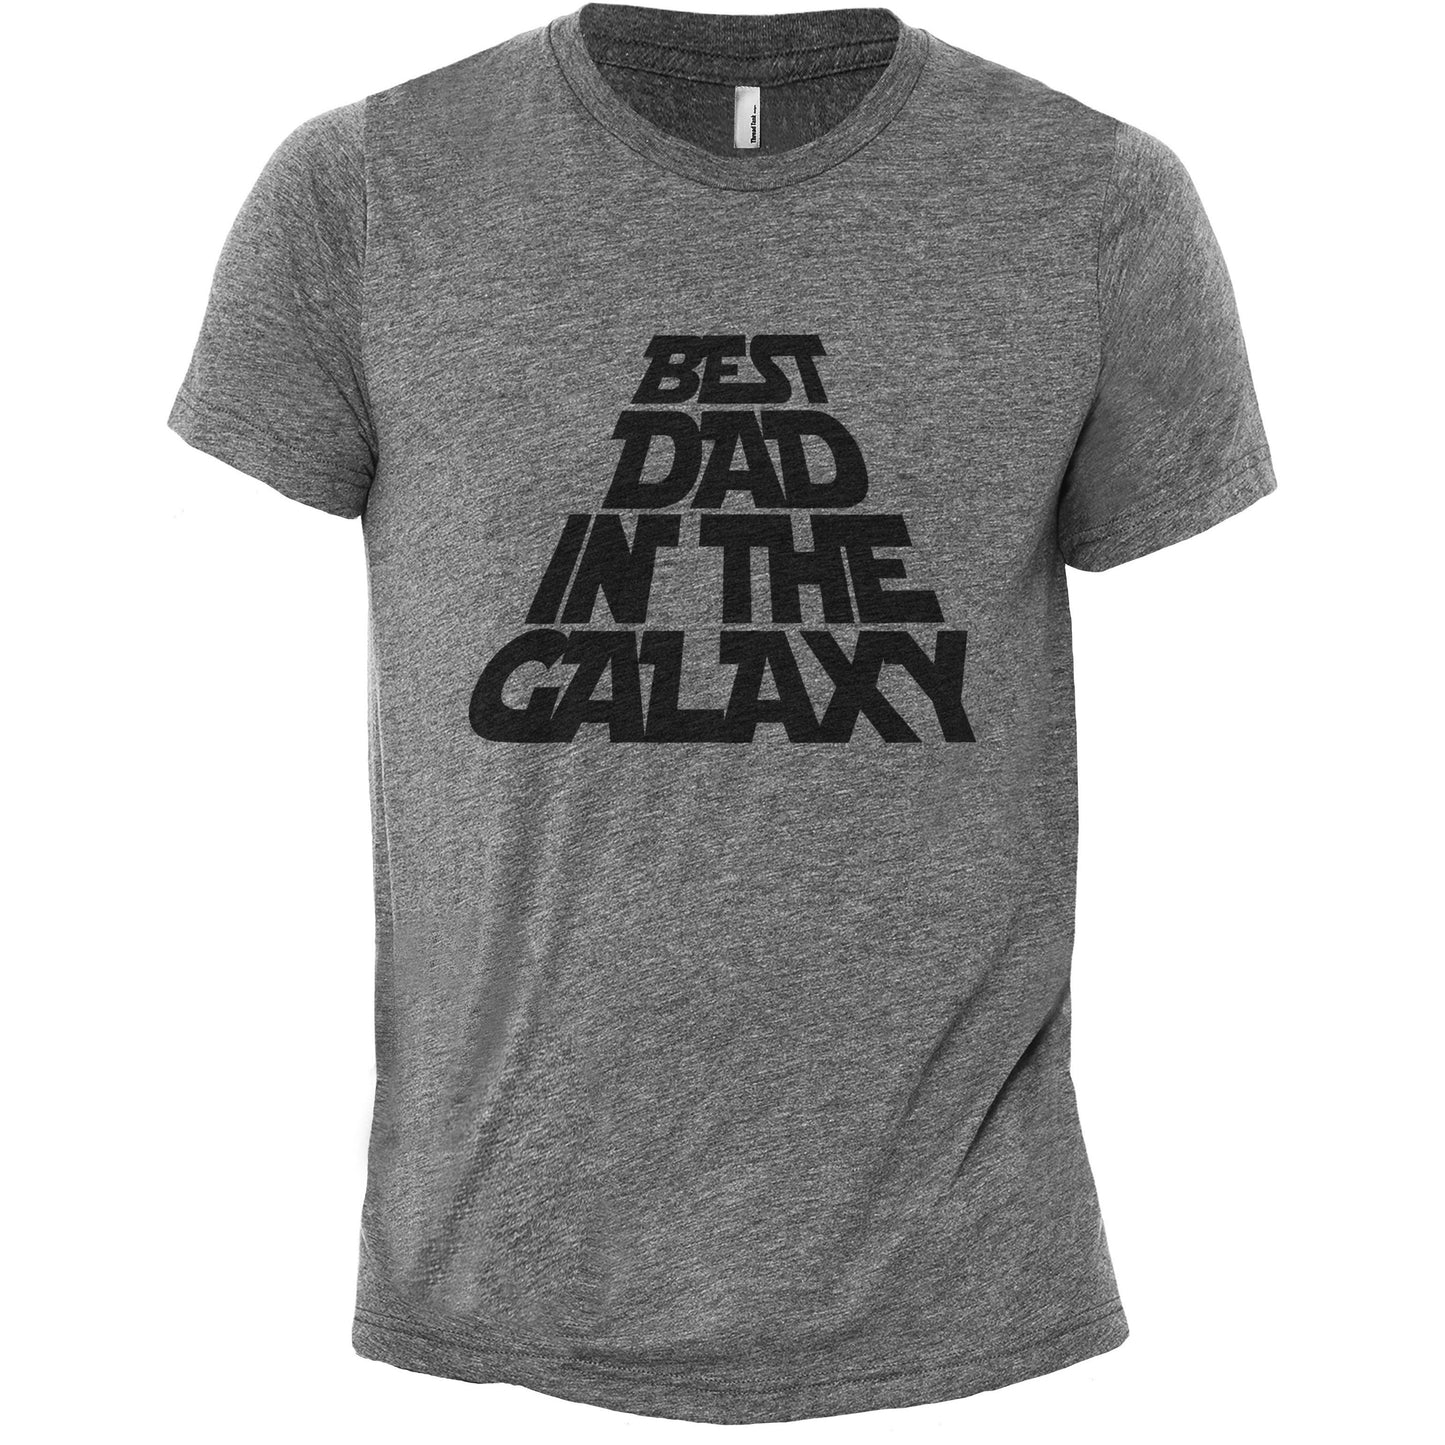 The Best Dad in the Galaxy - Stories You Can Wear